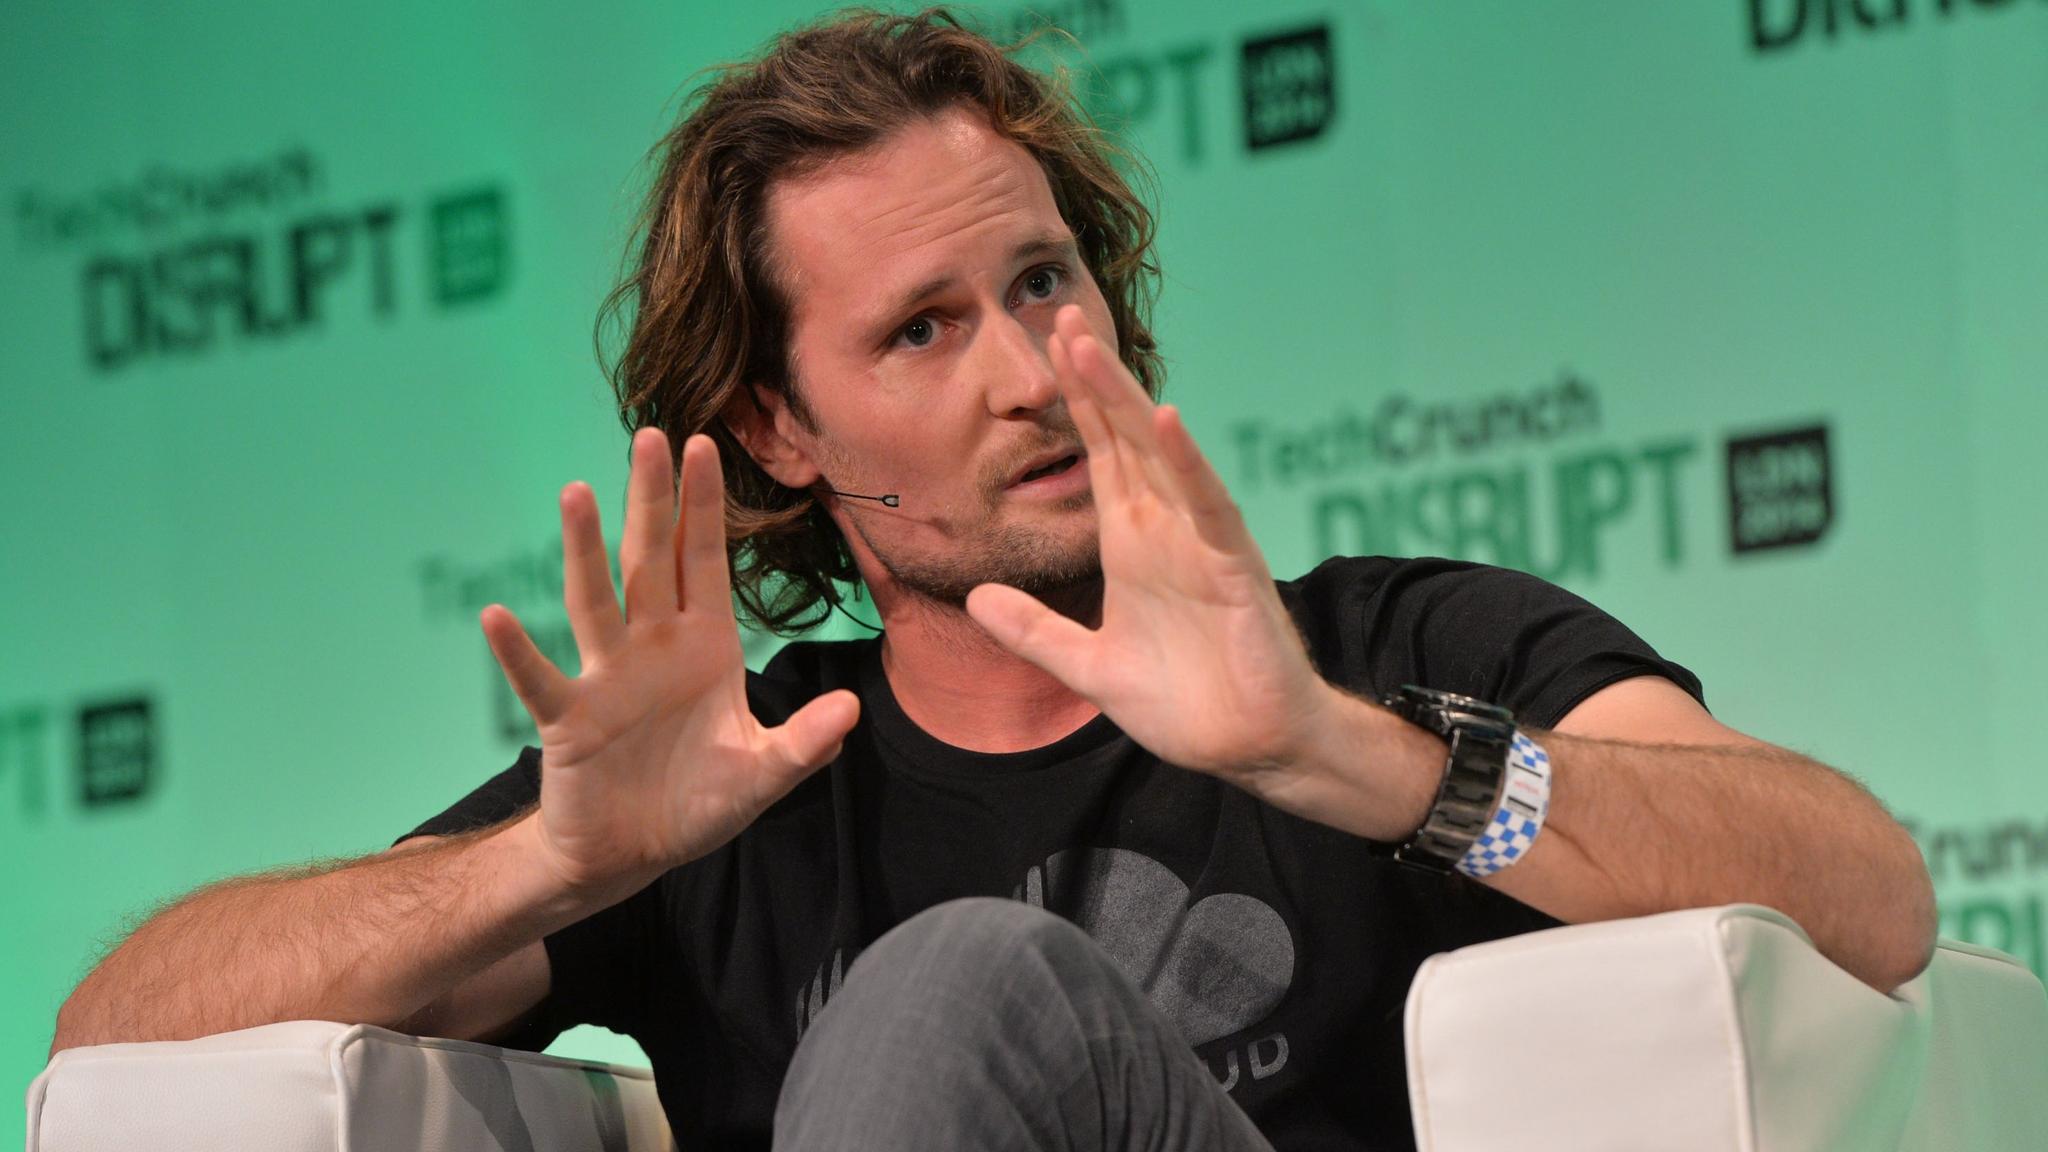 SoundCloud’s co-founder Eric Wahlforss resigns as CFO